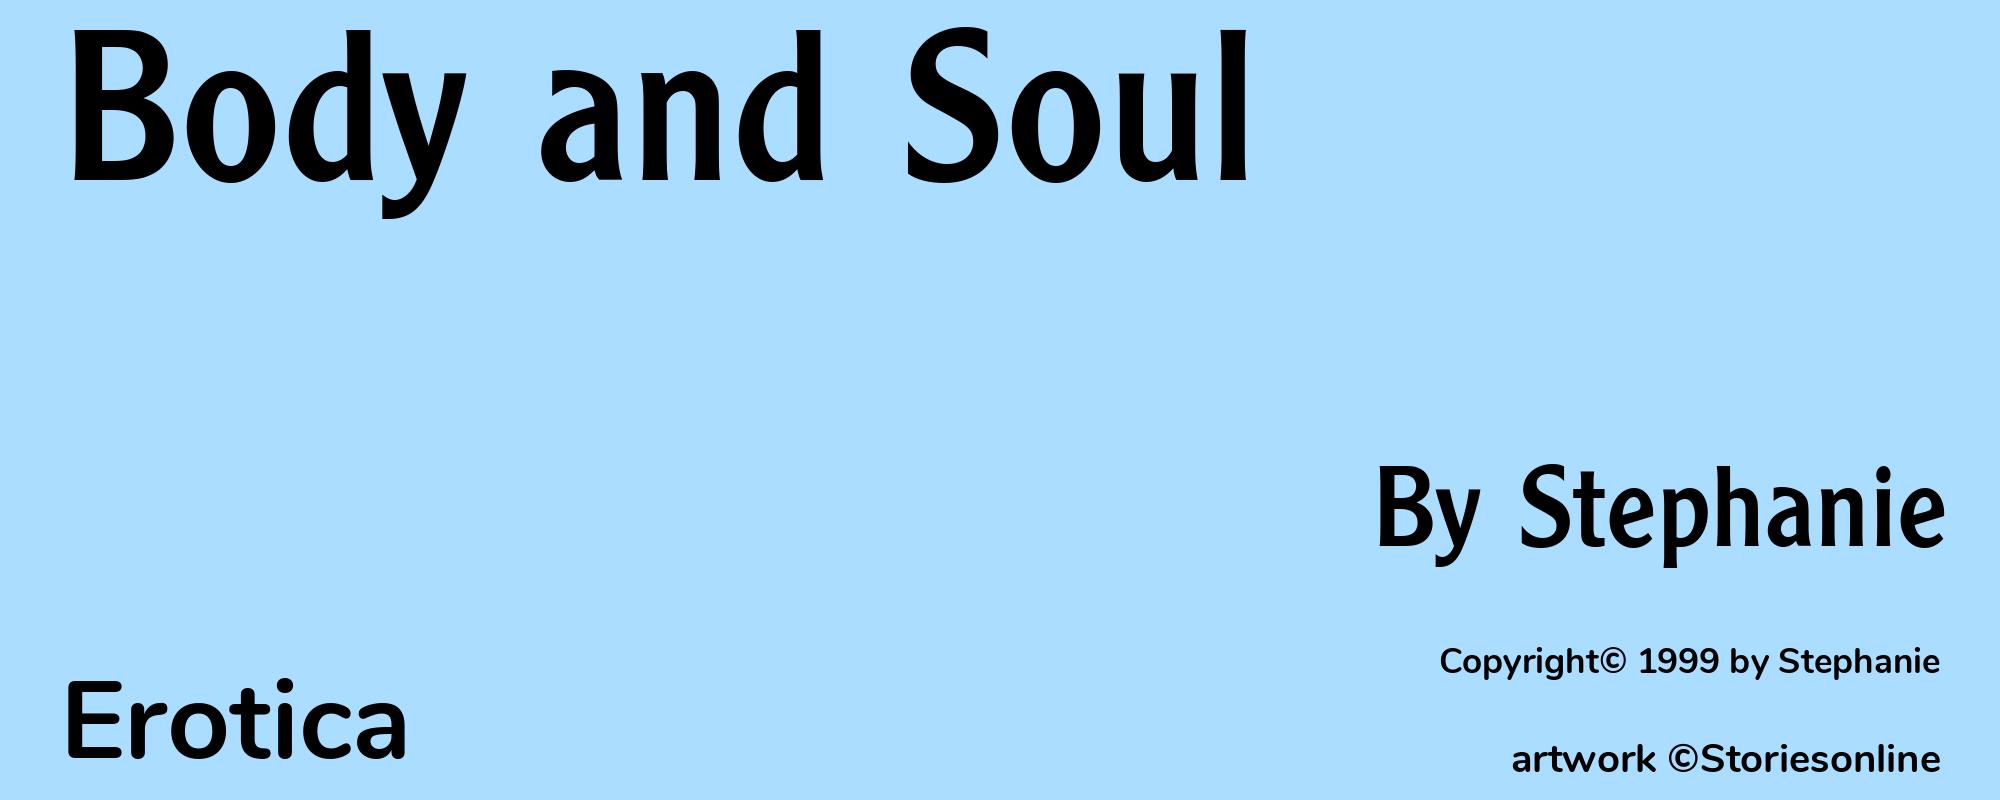 Body and Soul - Cover